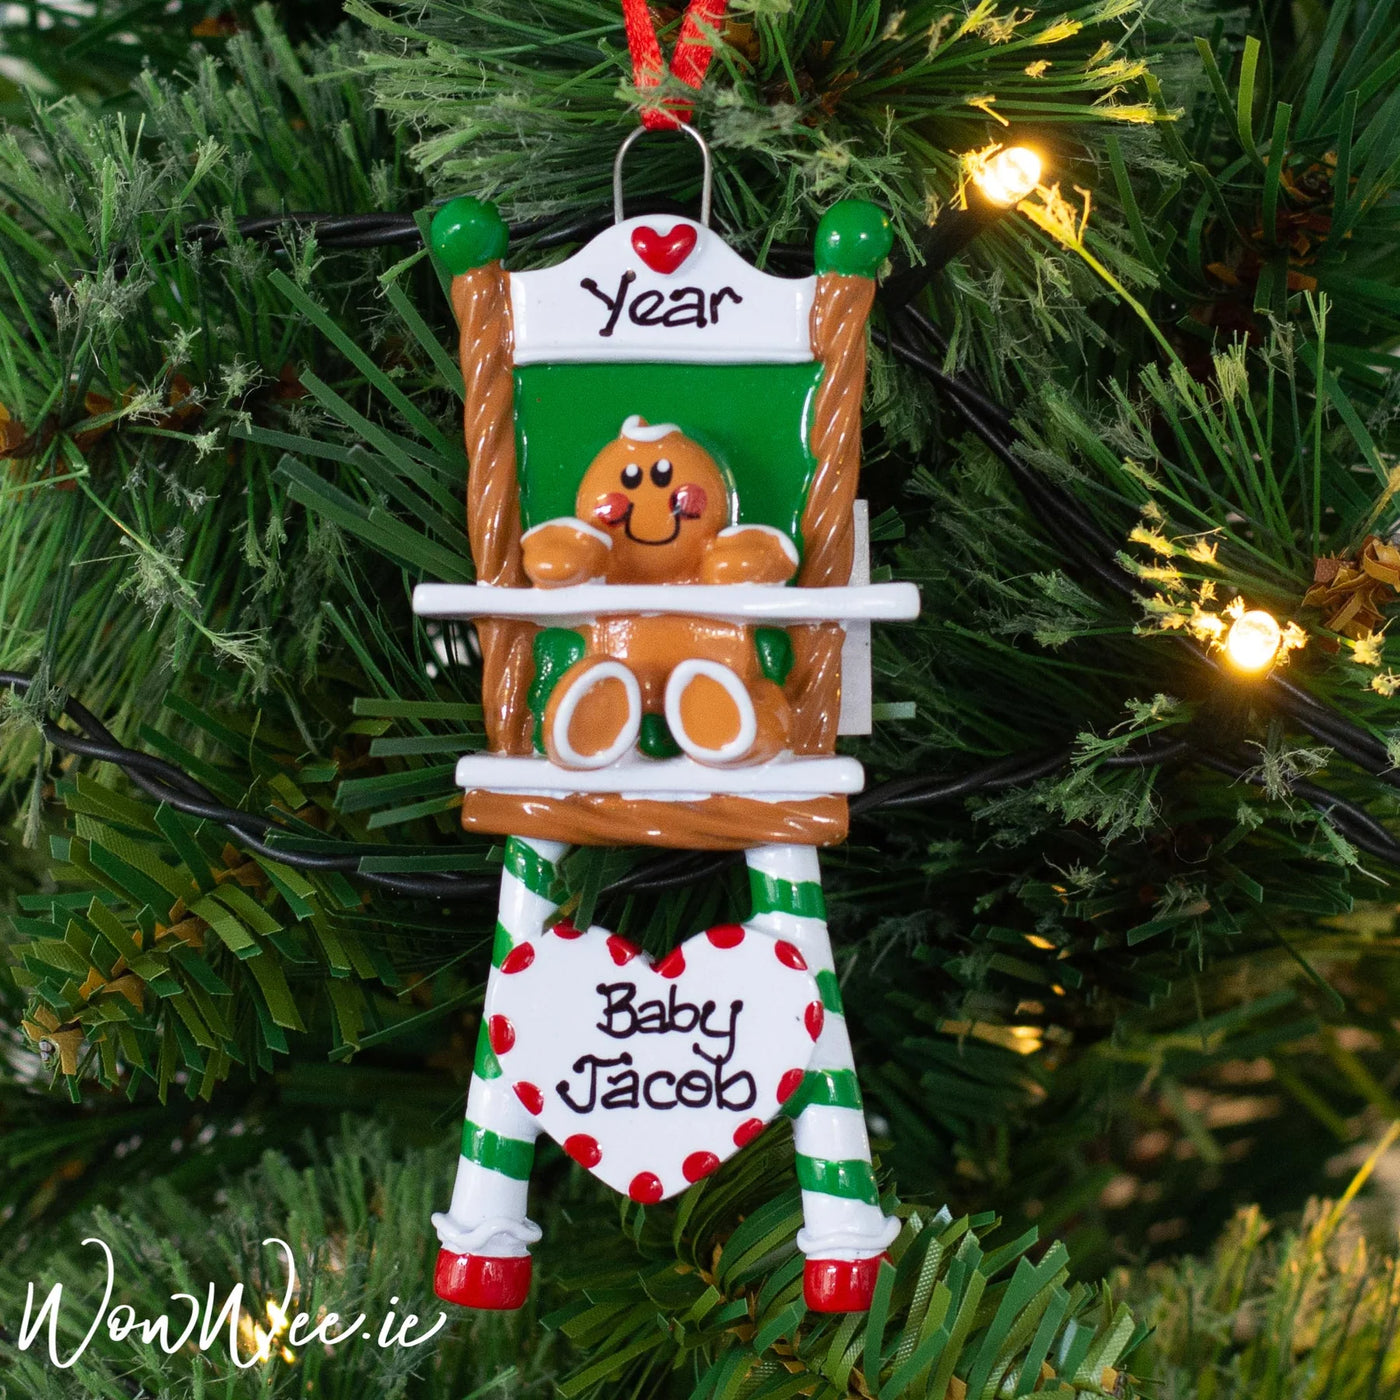 Personalised Christmas Gift Set - Bailey Bear and Personalised Christmas Ornament  - Gingerbread Baby in High Chair